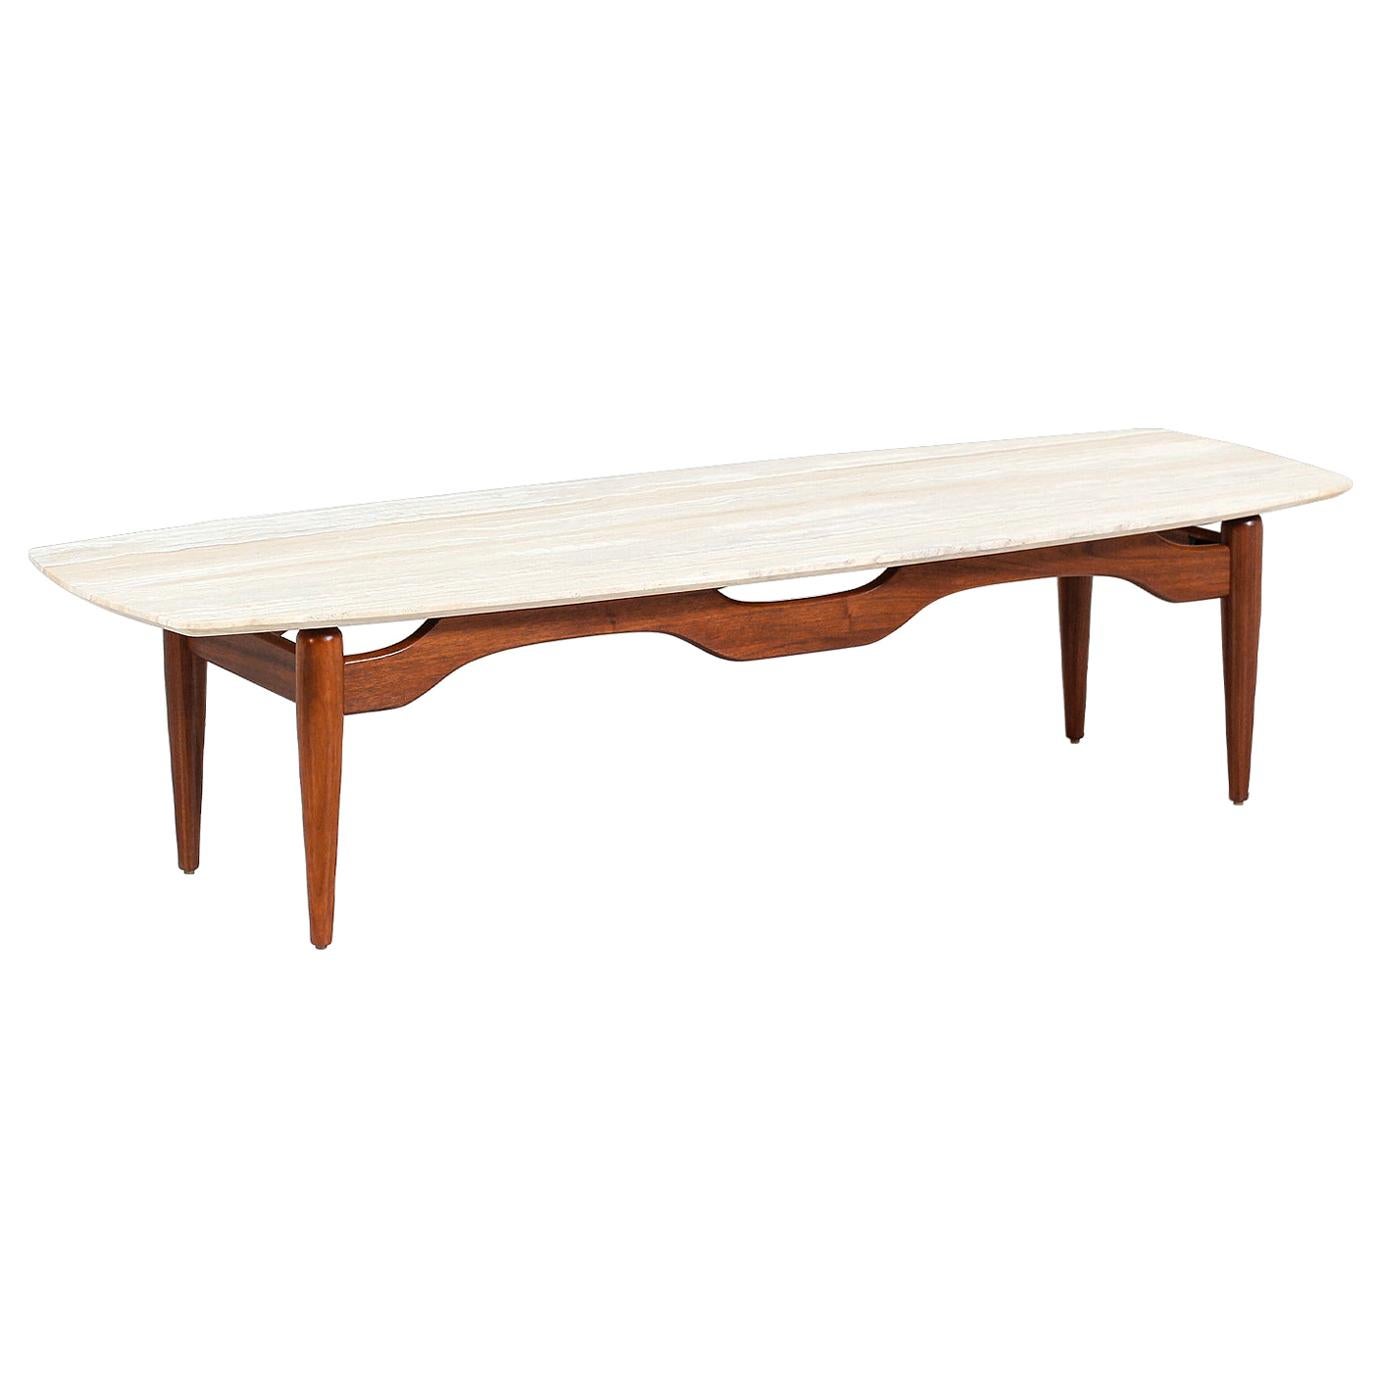 Midcentury Floating-Top Surfboard Coffee Table with Travertine Top